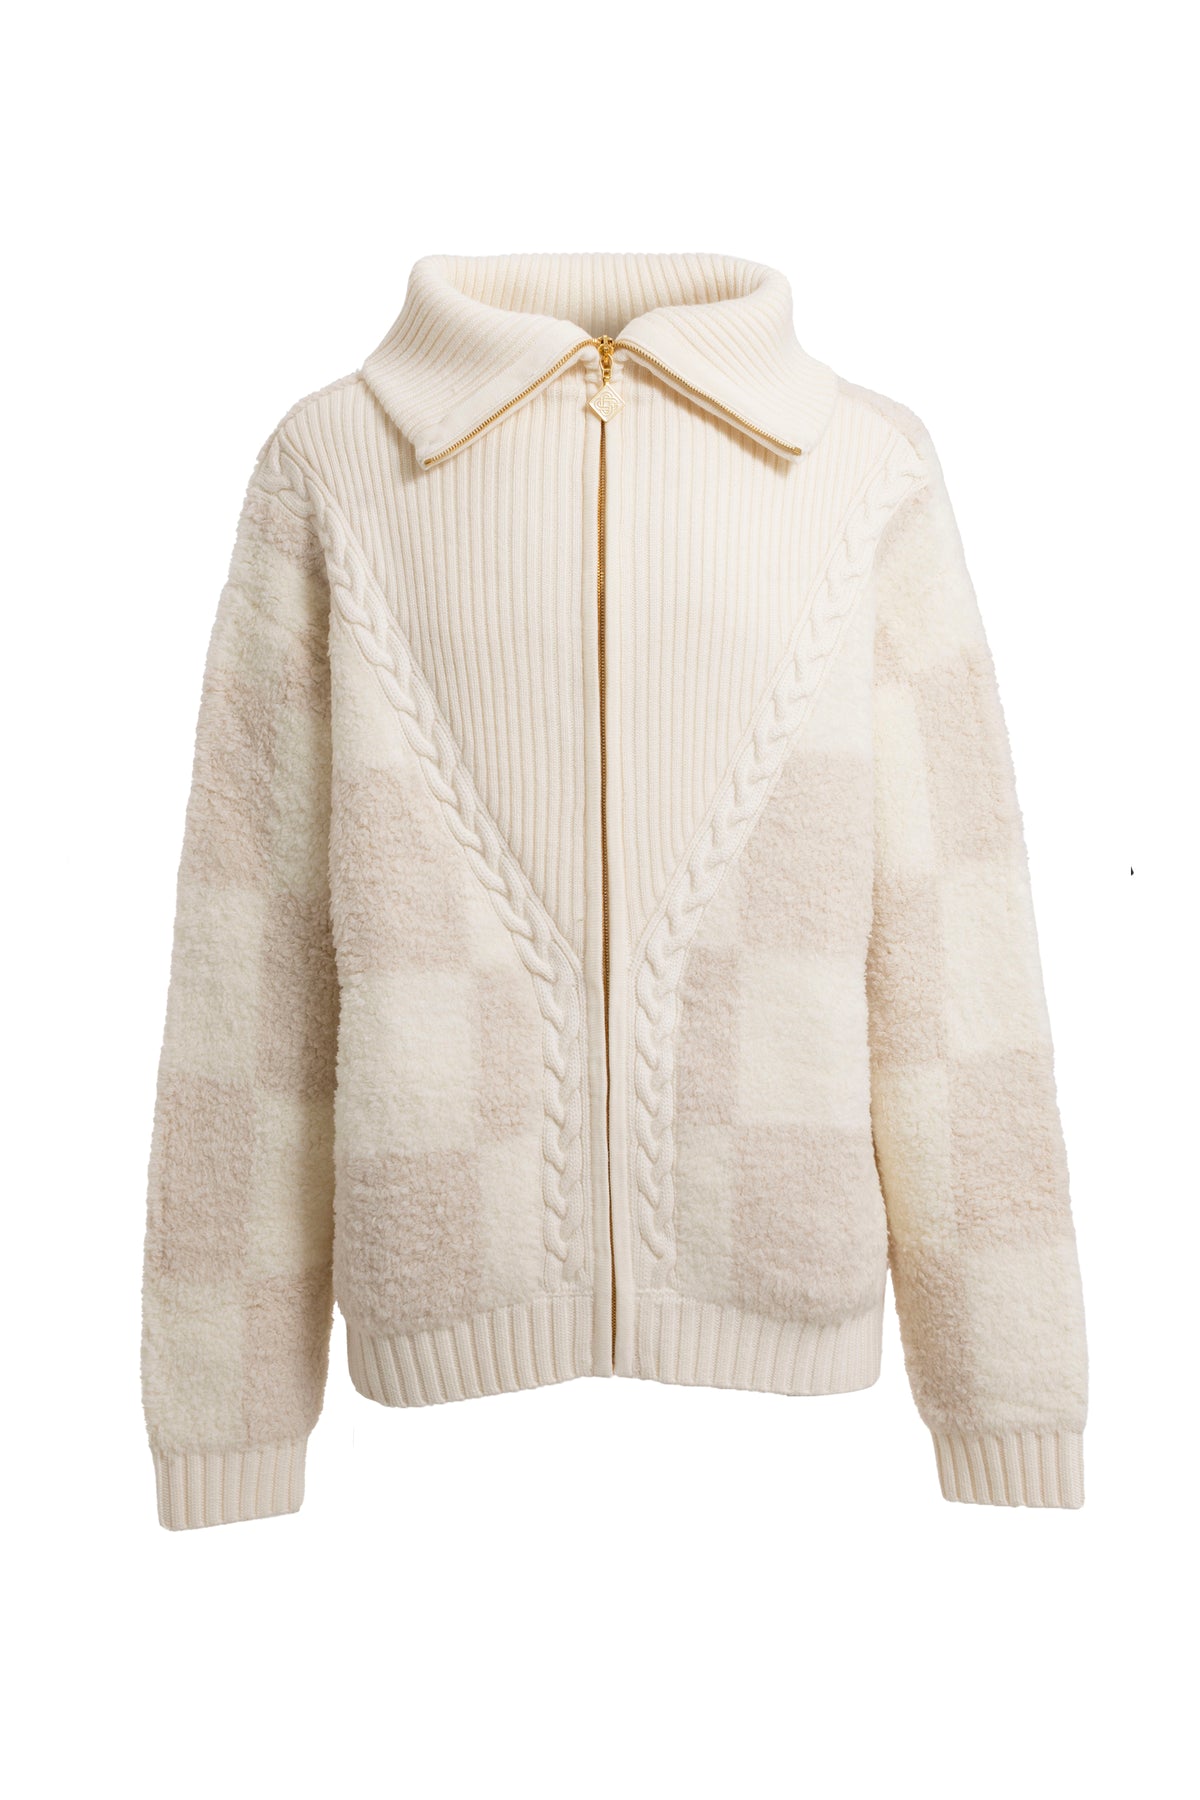 CHECKED BOUCLE CARDIGAN / WHT BEI